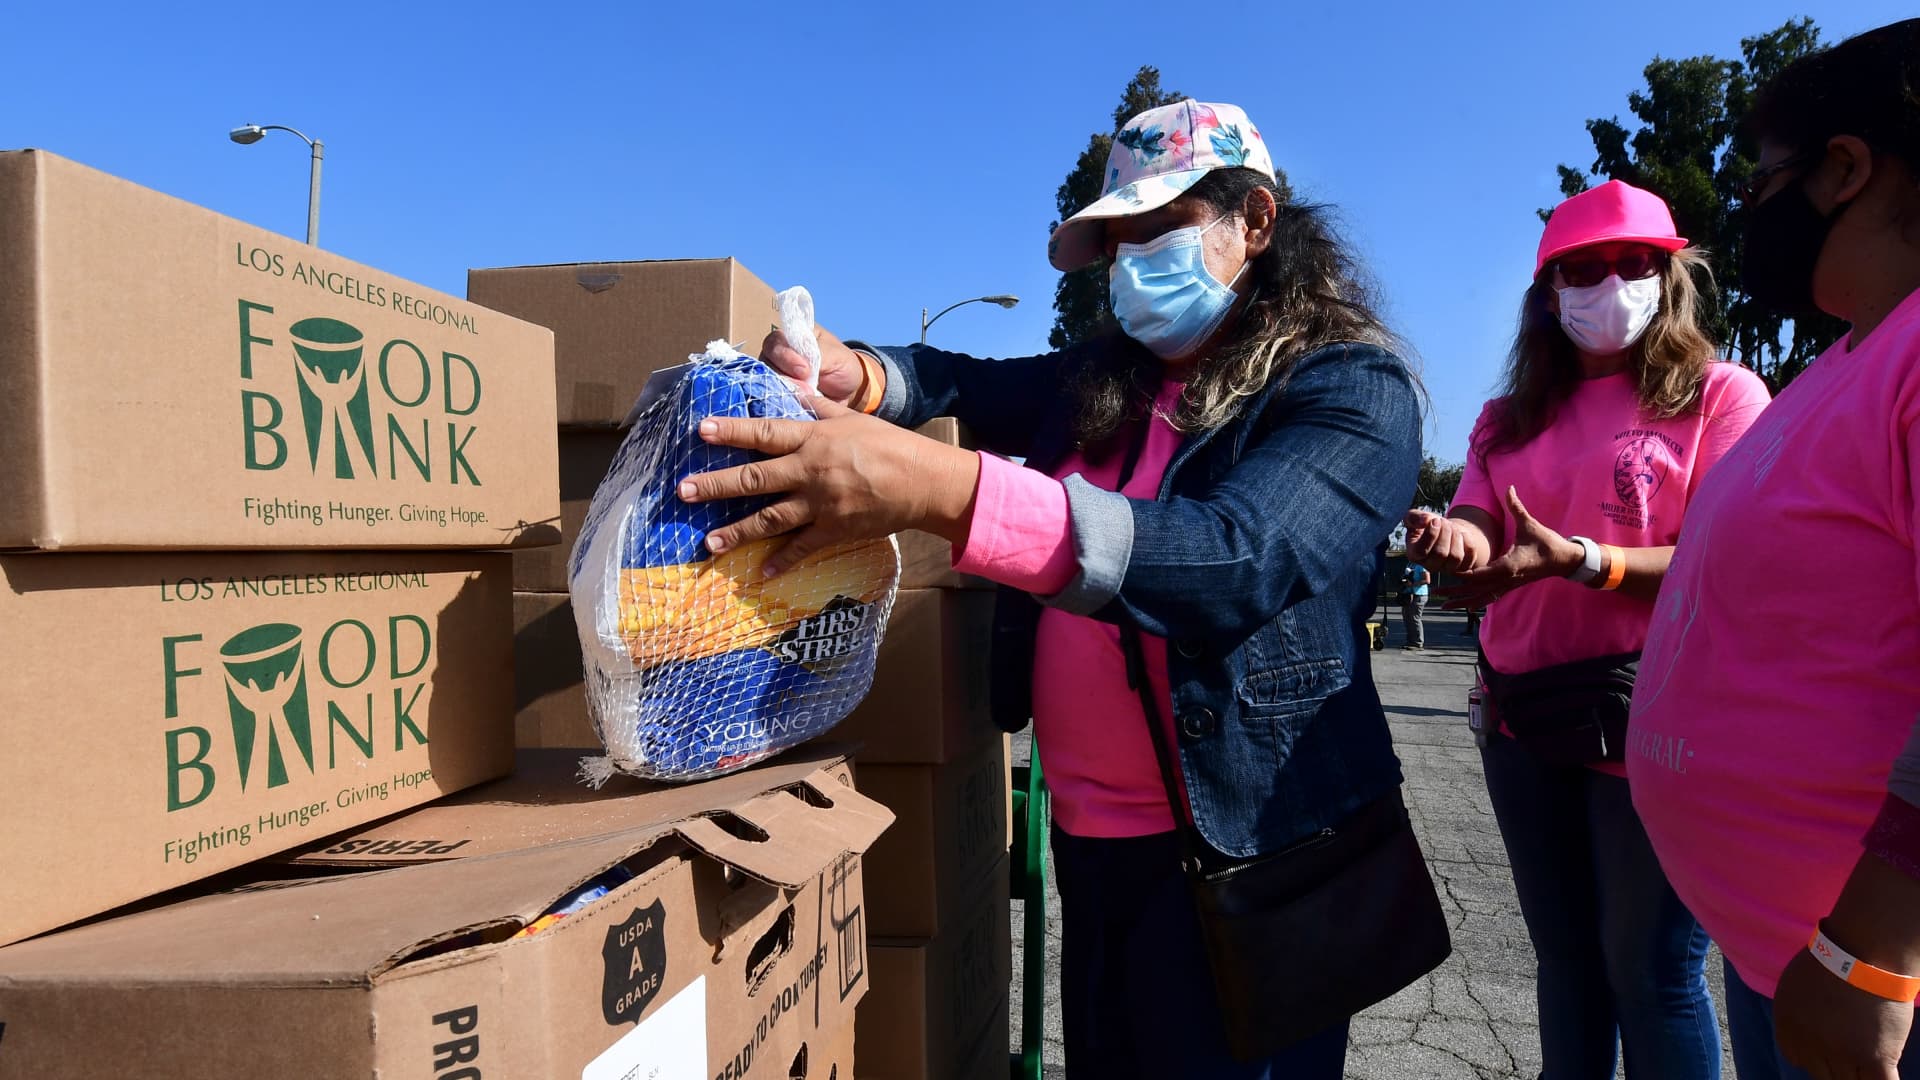 Volunteers from women's organization Nuevo Amanecer Mujer Integral help with the distribution of frozen turkeys and food boxes ahead of Thanksgiving to families affected by the Covid-19 pandemic on November 18, 2020 in Los Angeles, California.